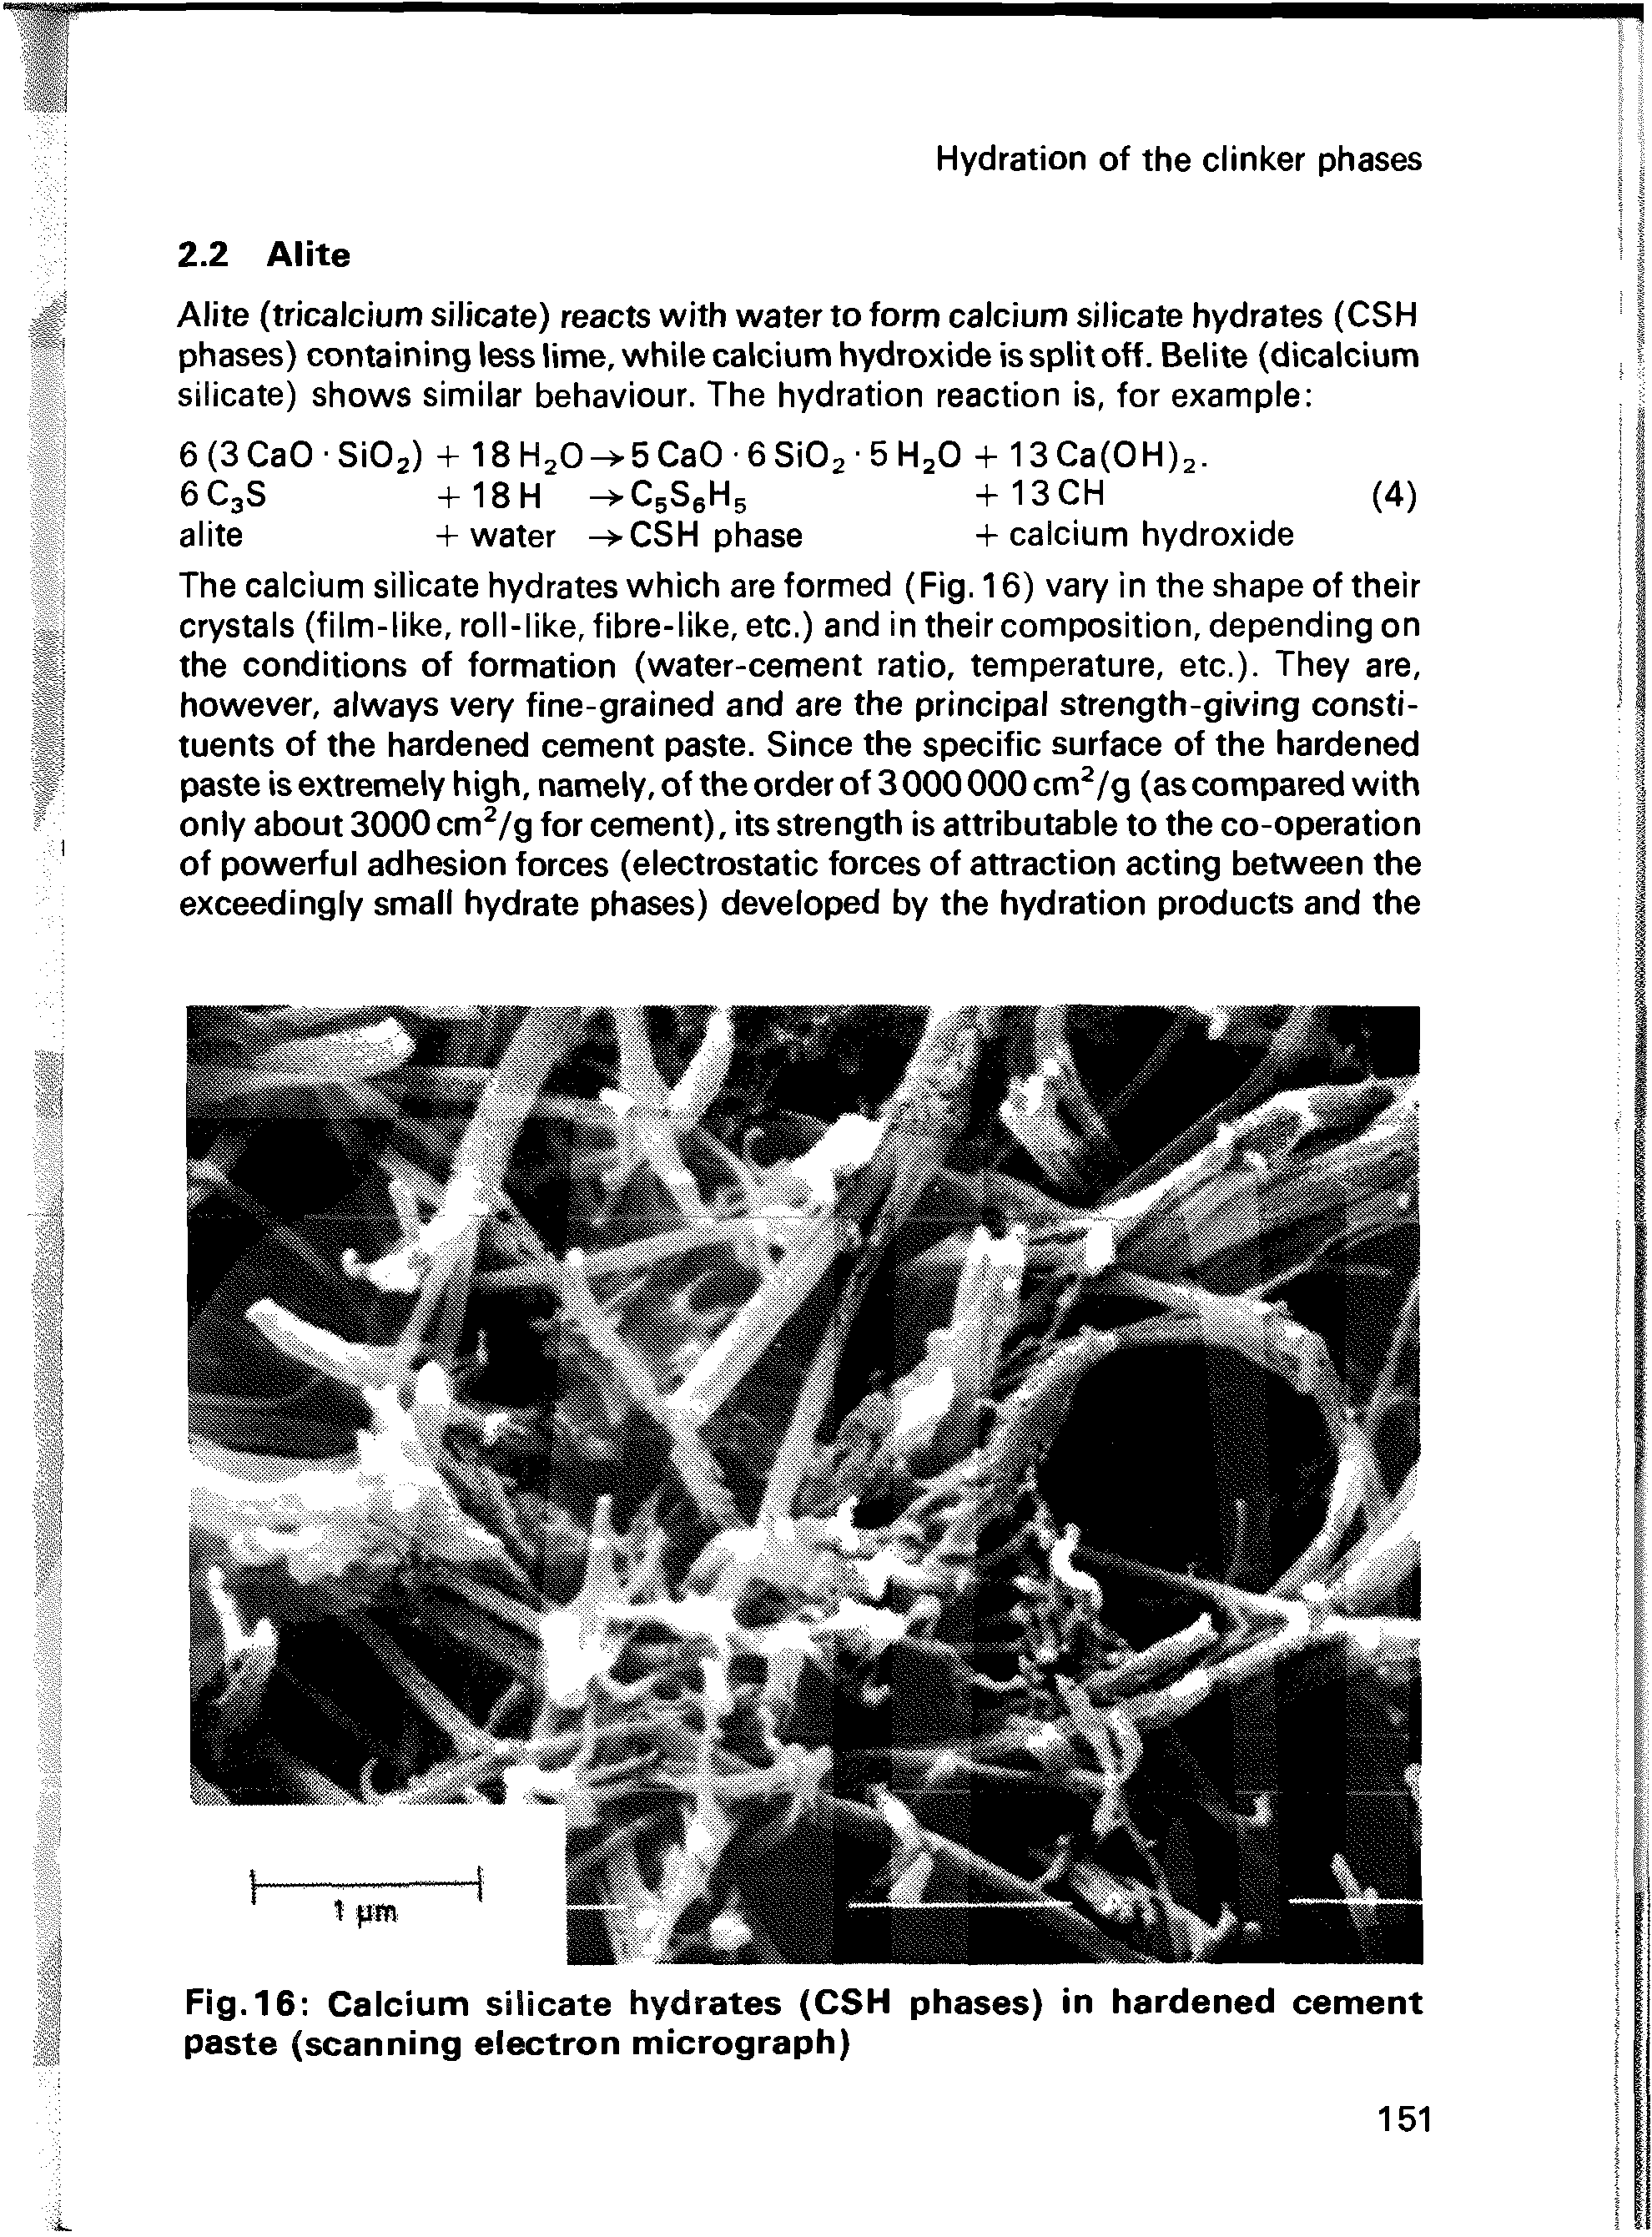 Fig. 16 Calcium silicate hydrates (CSH phases) in hardened cement paste (scanning electron micrograph)...